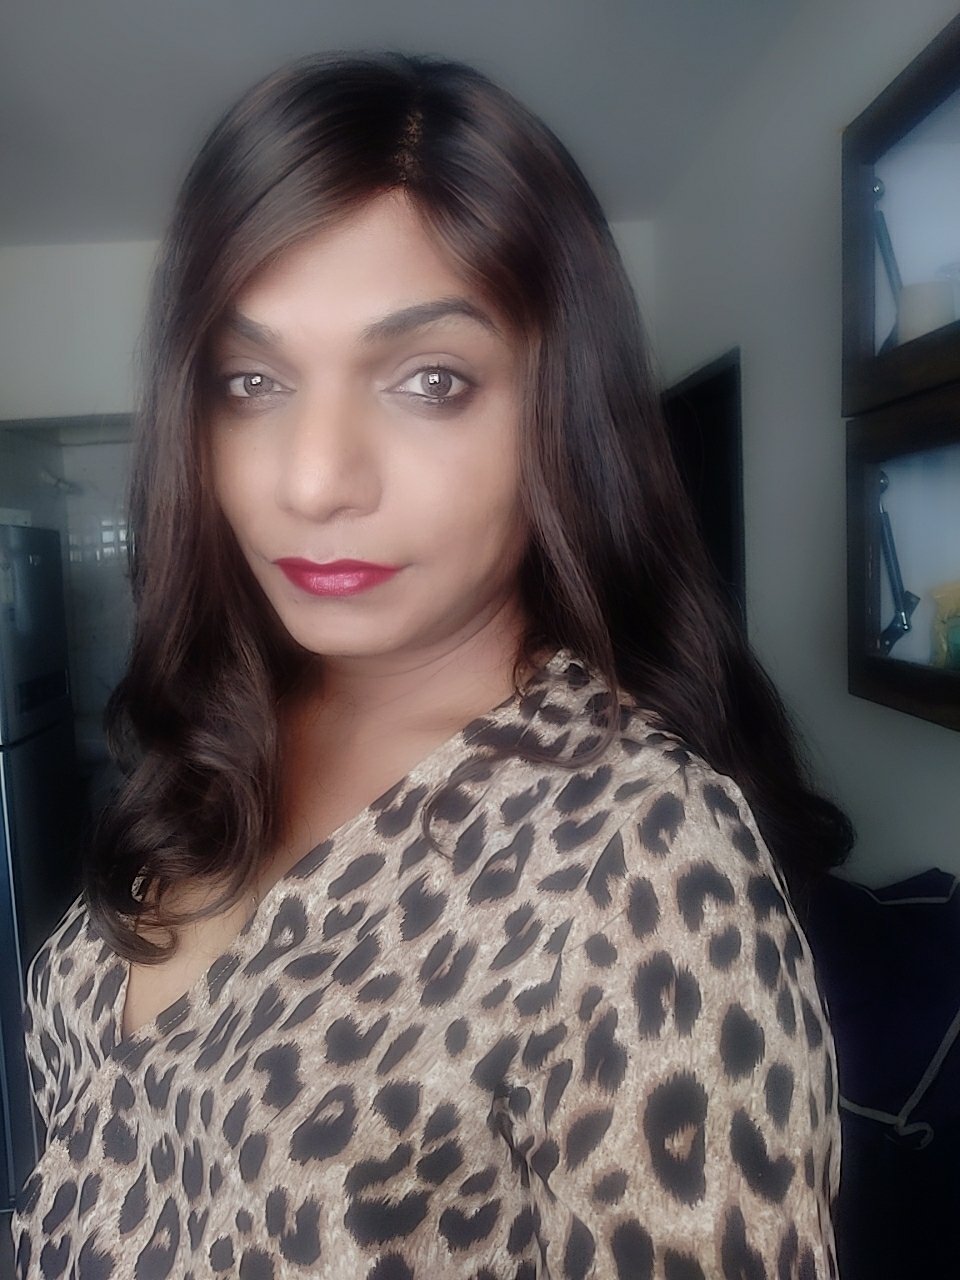 Shemail Number For Sex In Pune - Hazeldom69, Indian Transsexual dominatrix in Pune